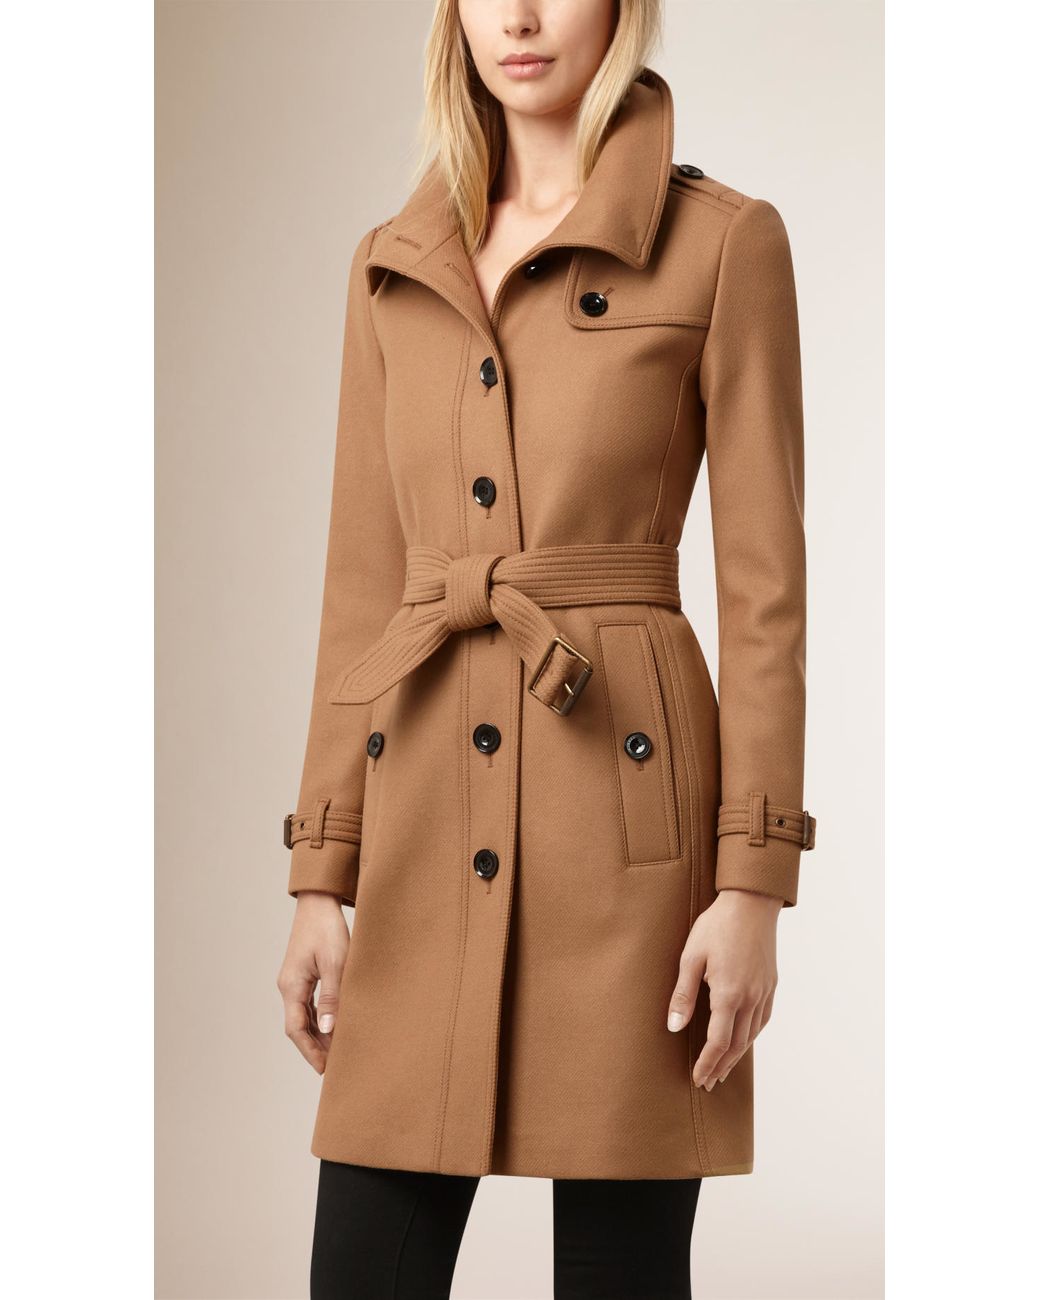 Burberry Virgin Wool Cashmere Blend Trench Coat in Camel (Brown) | Lyst